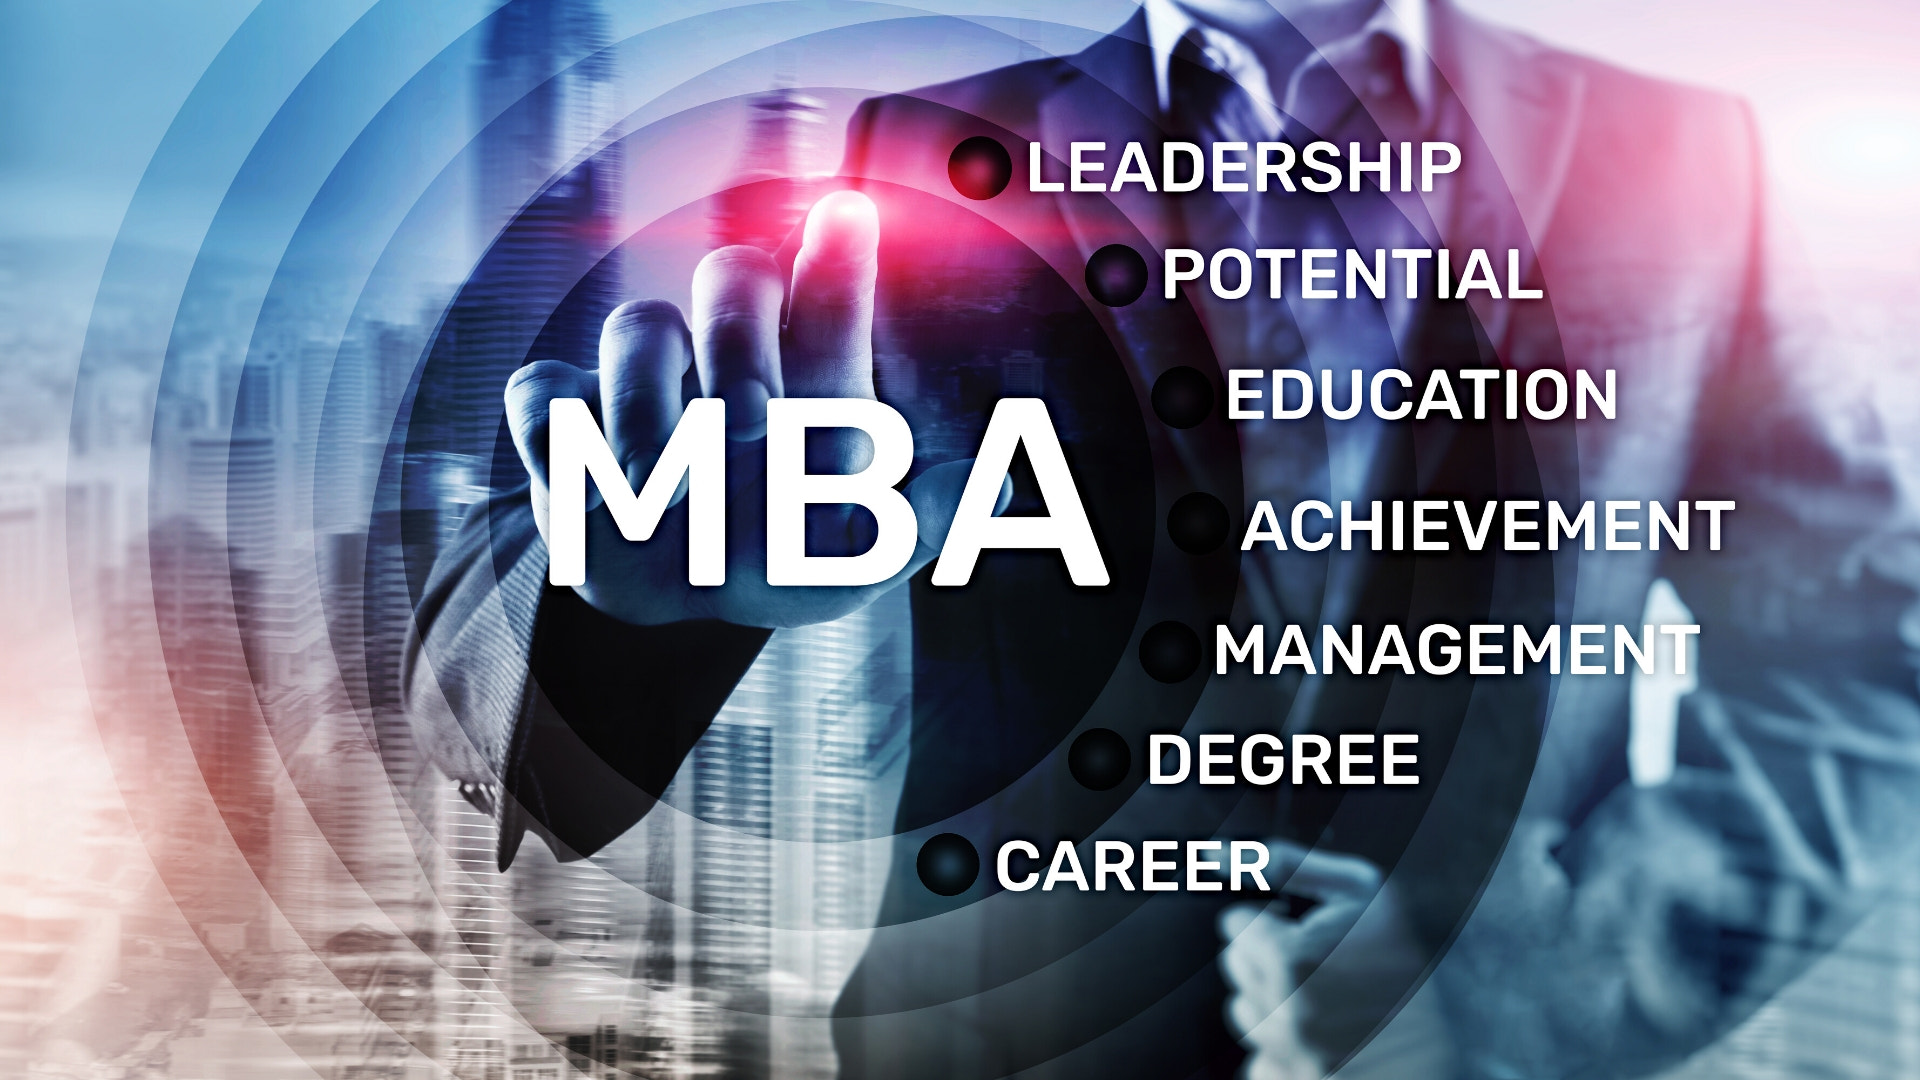 Crafting a Future with an MBA Degree